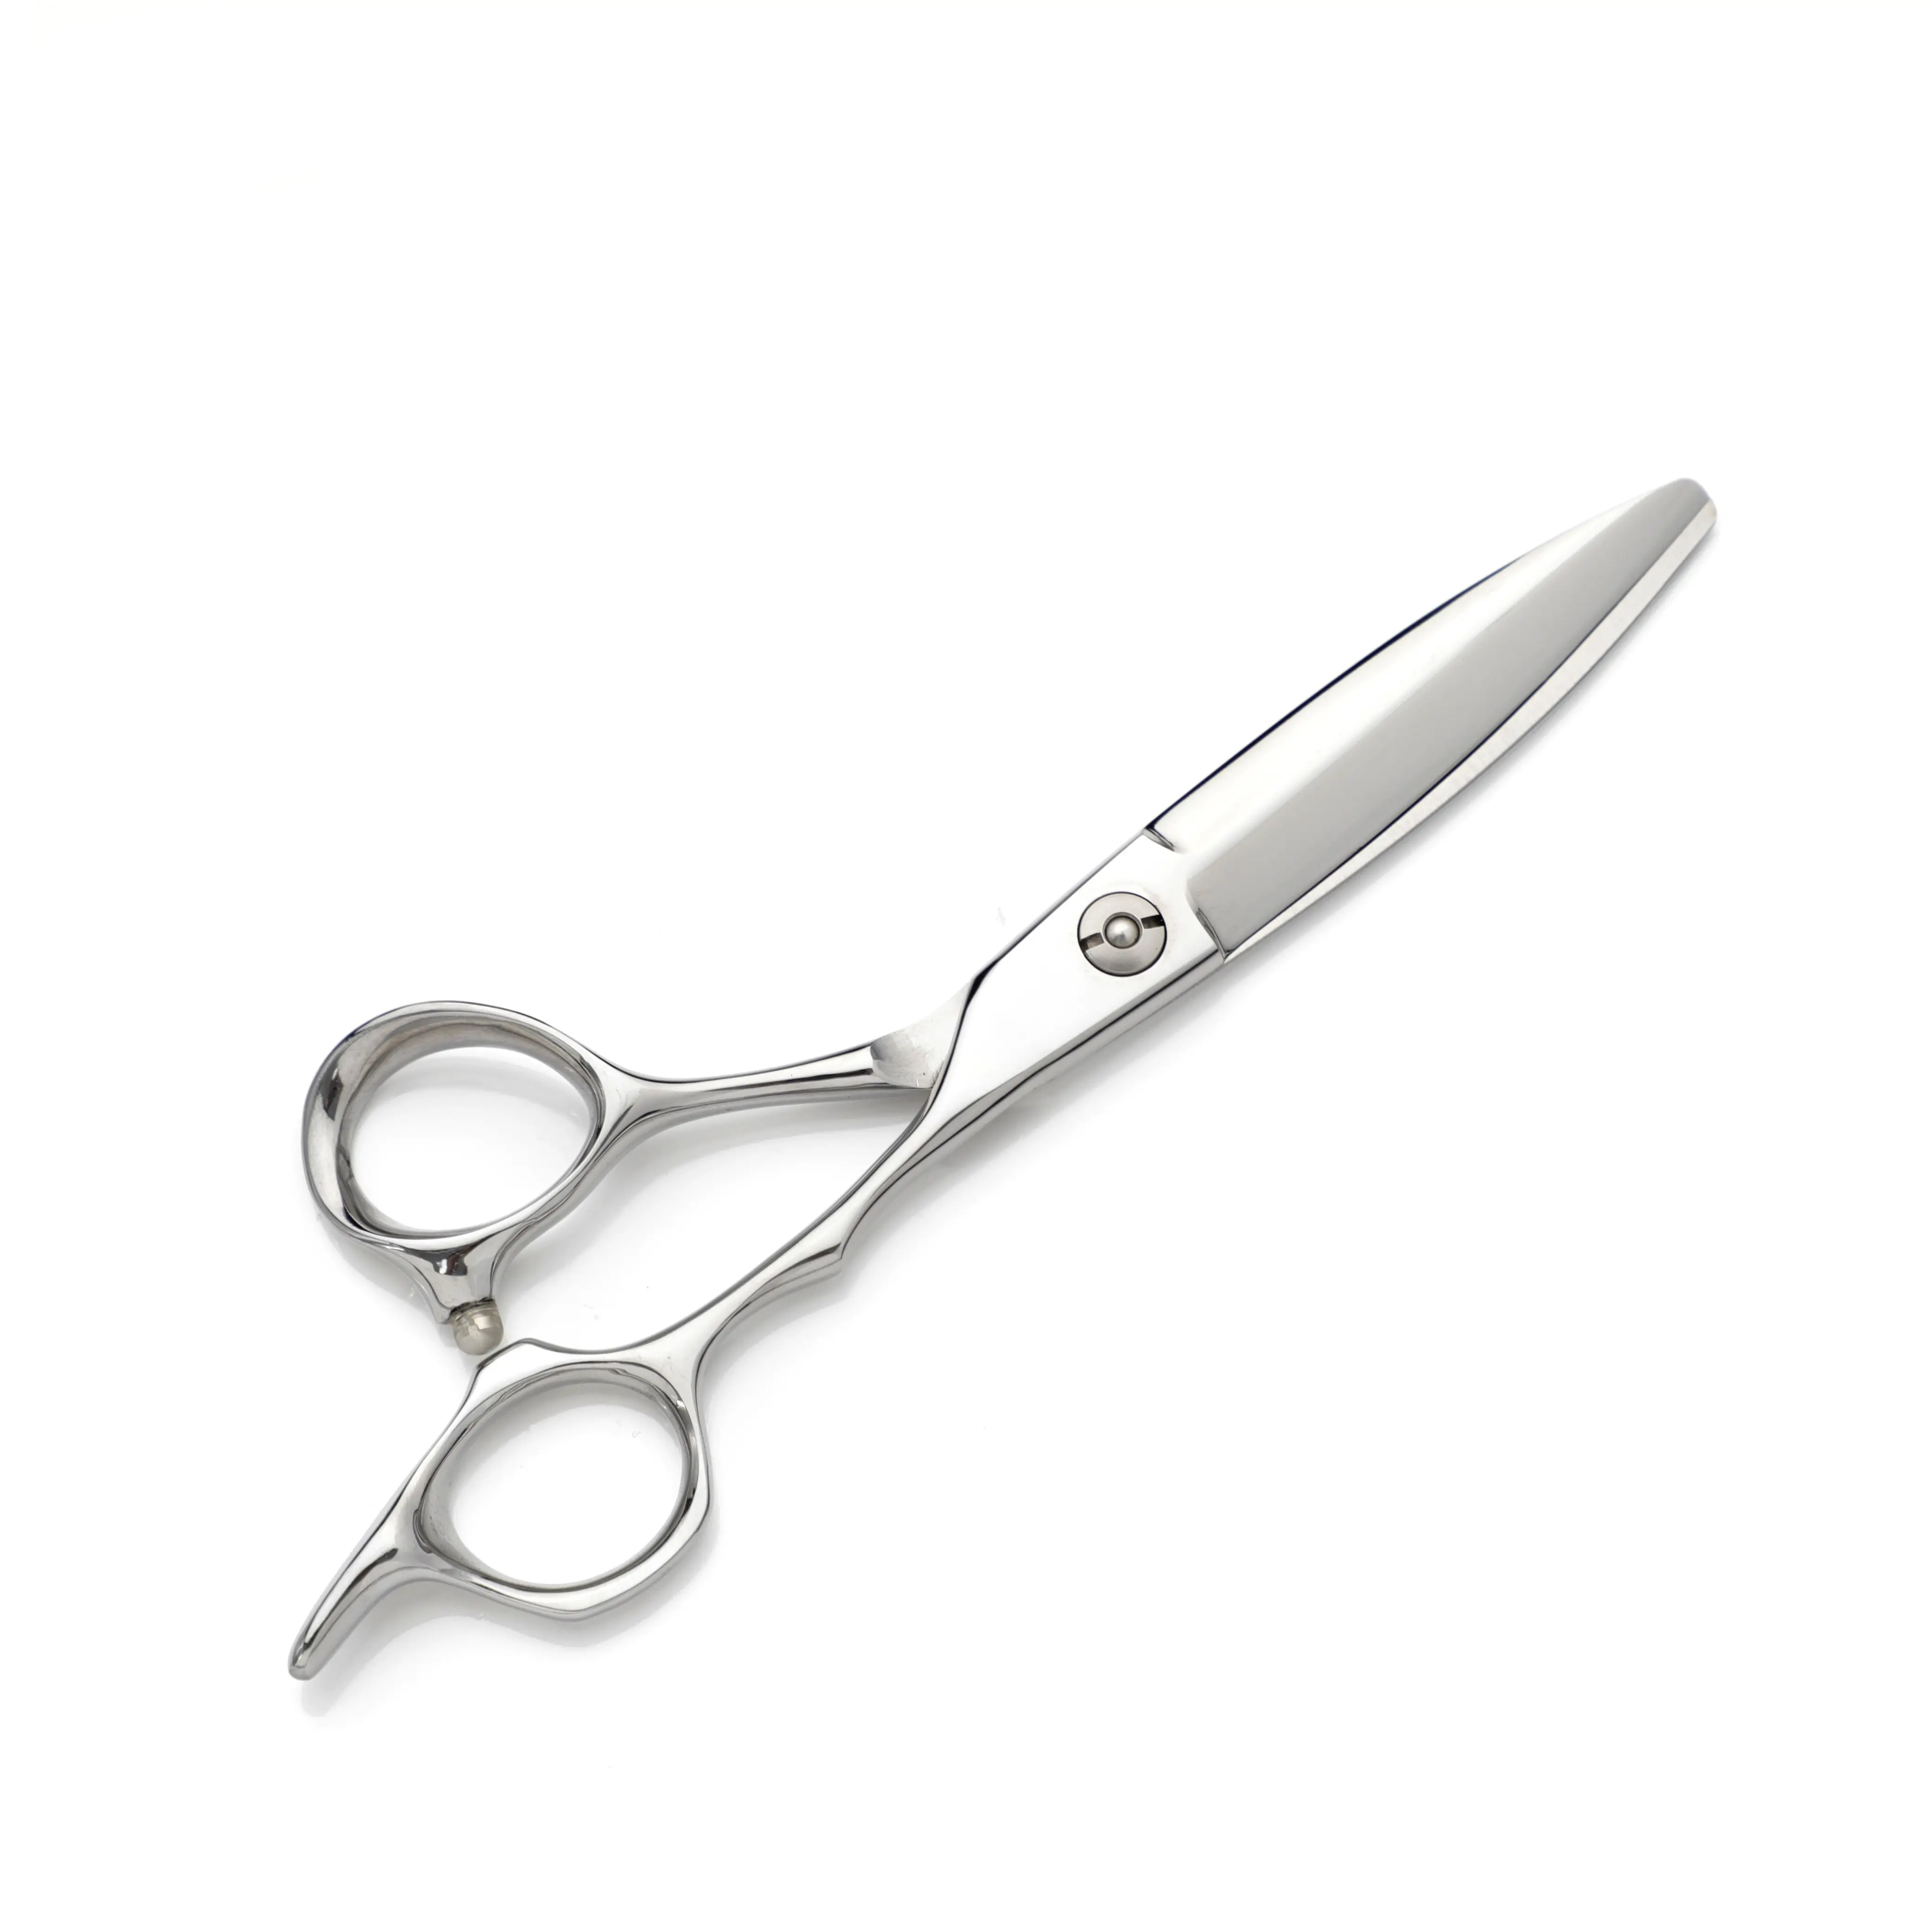 Professional Hair Styling Scissors Hairdressing Barber Cutting Shears 6.0 Inch